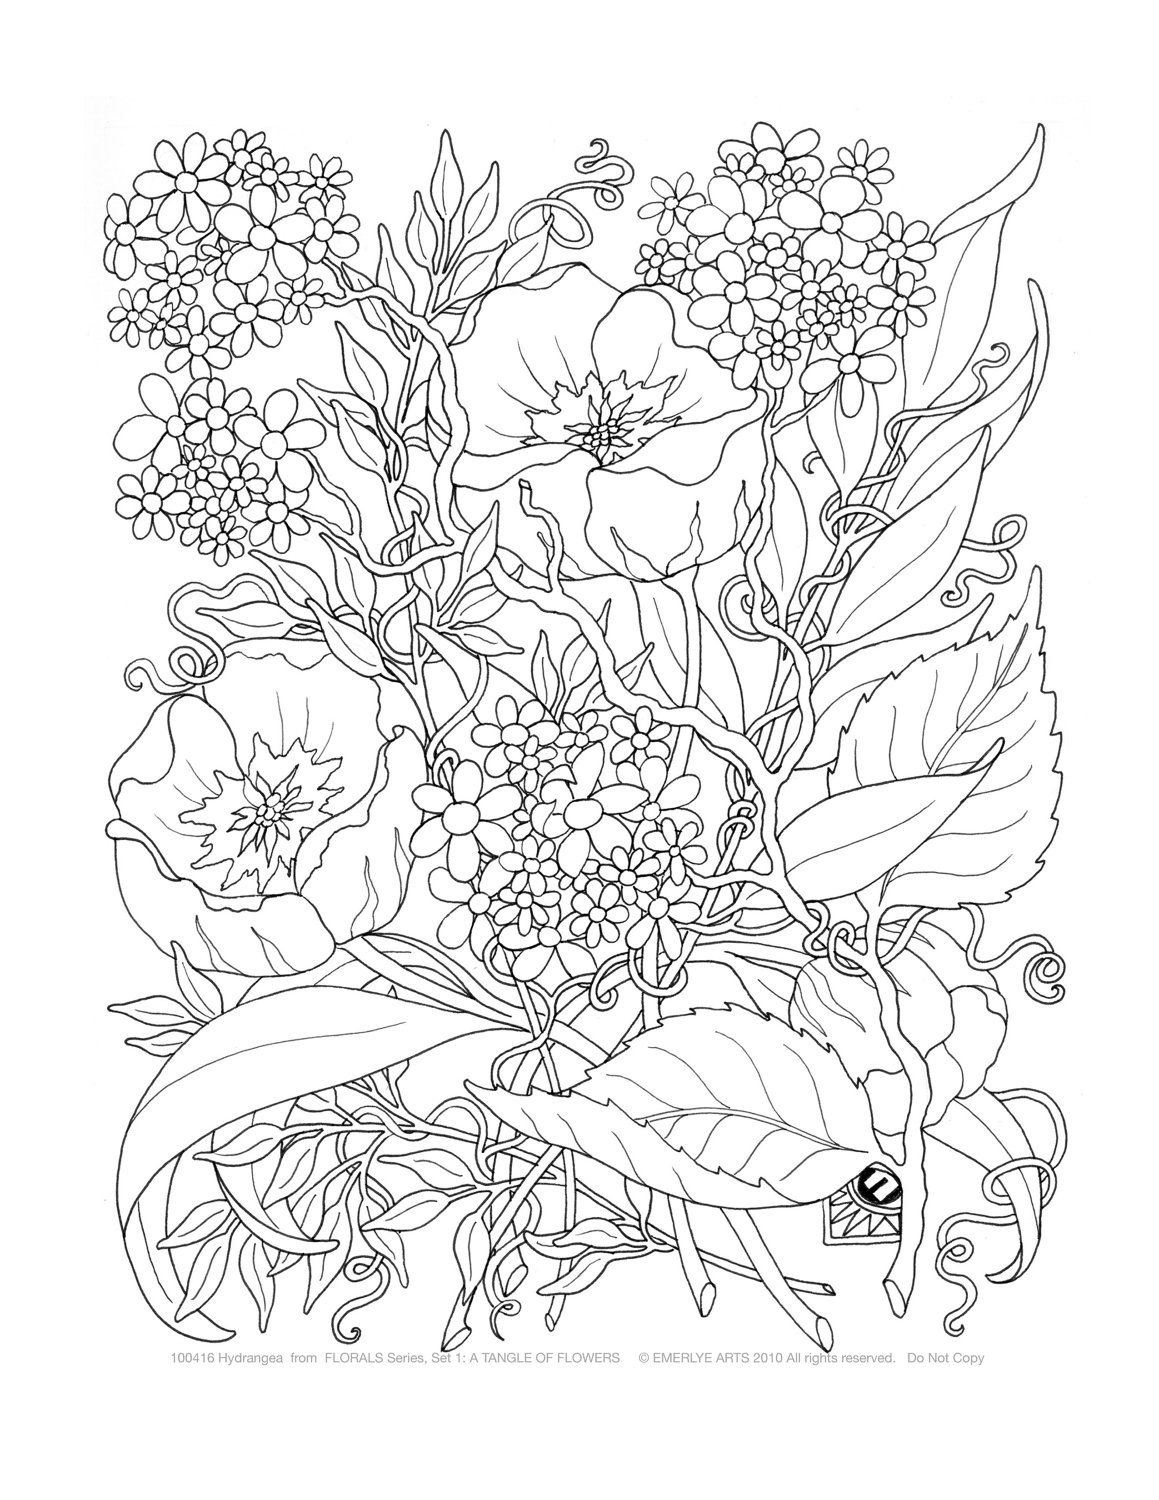 Free Flower Coloring Pages For Adults
 Coloring Pages for Adults Free